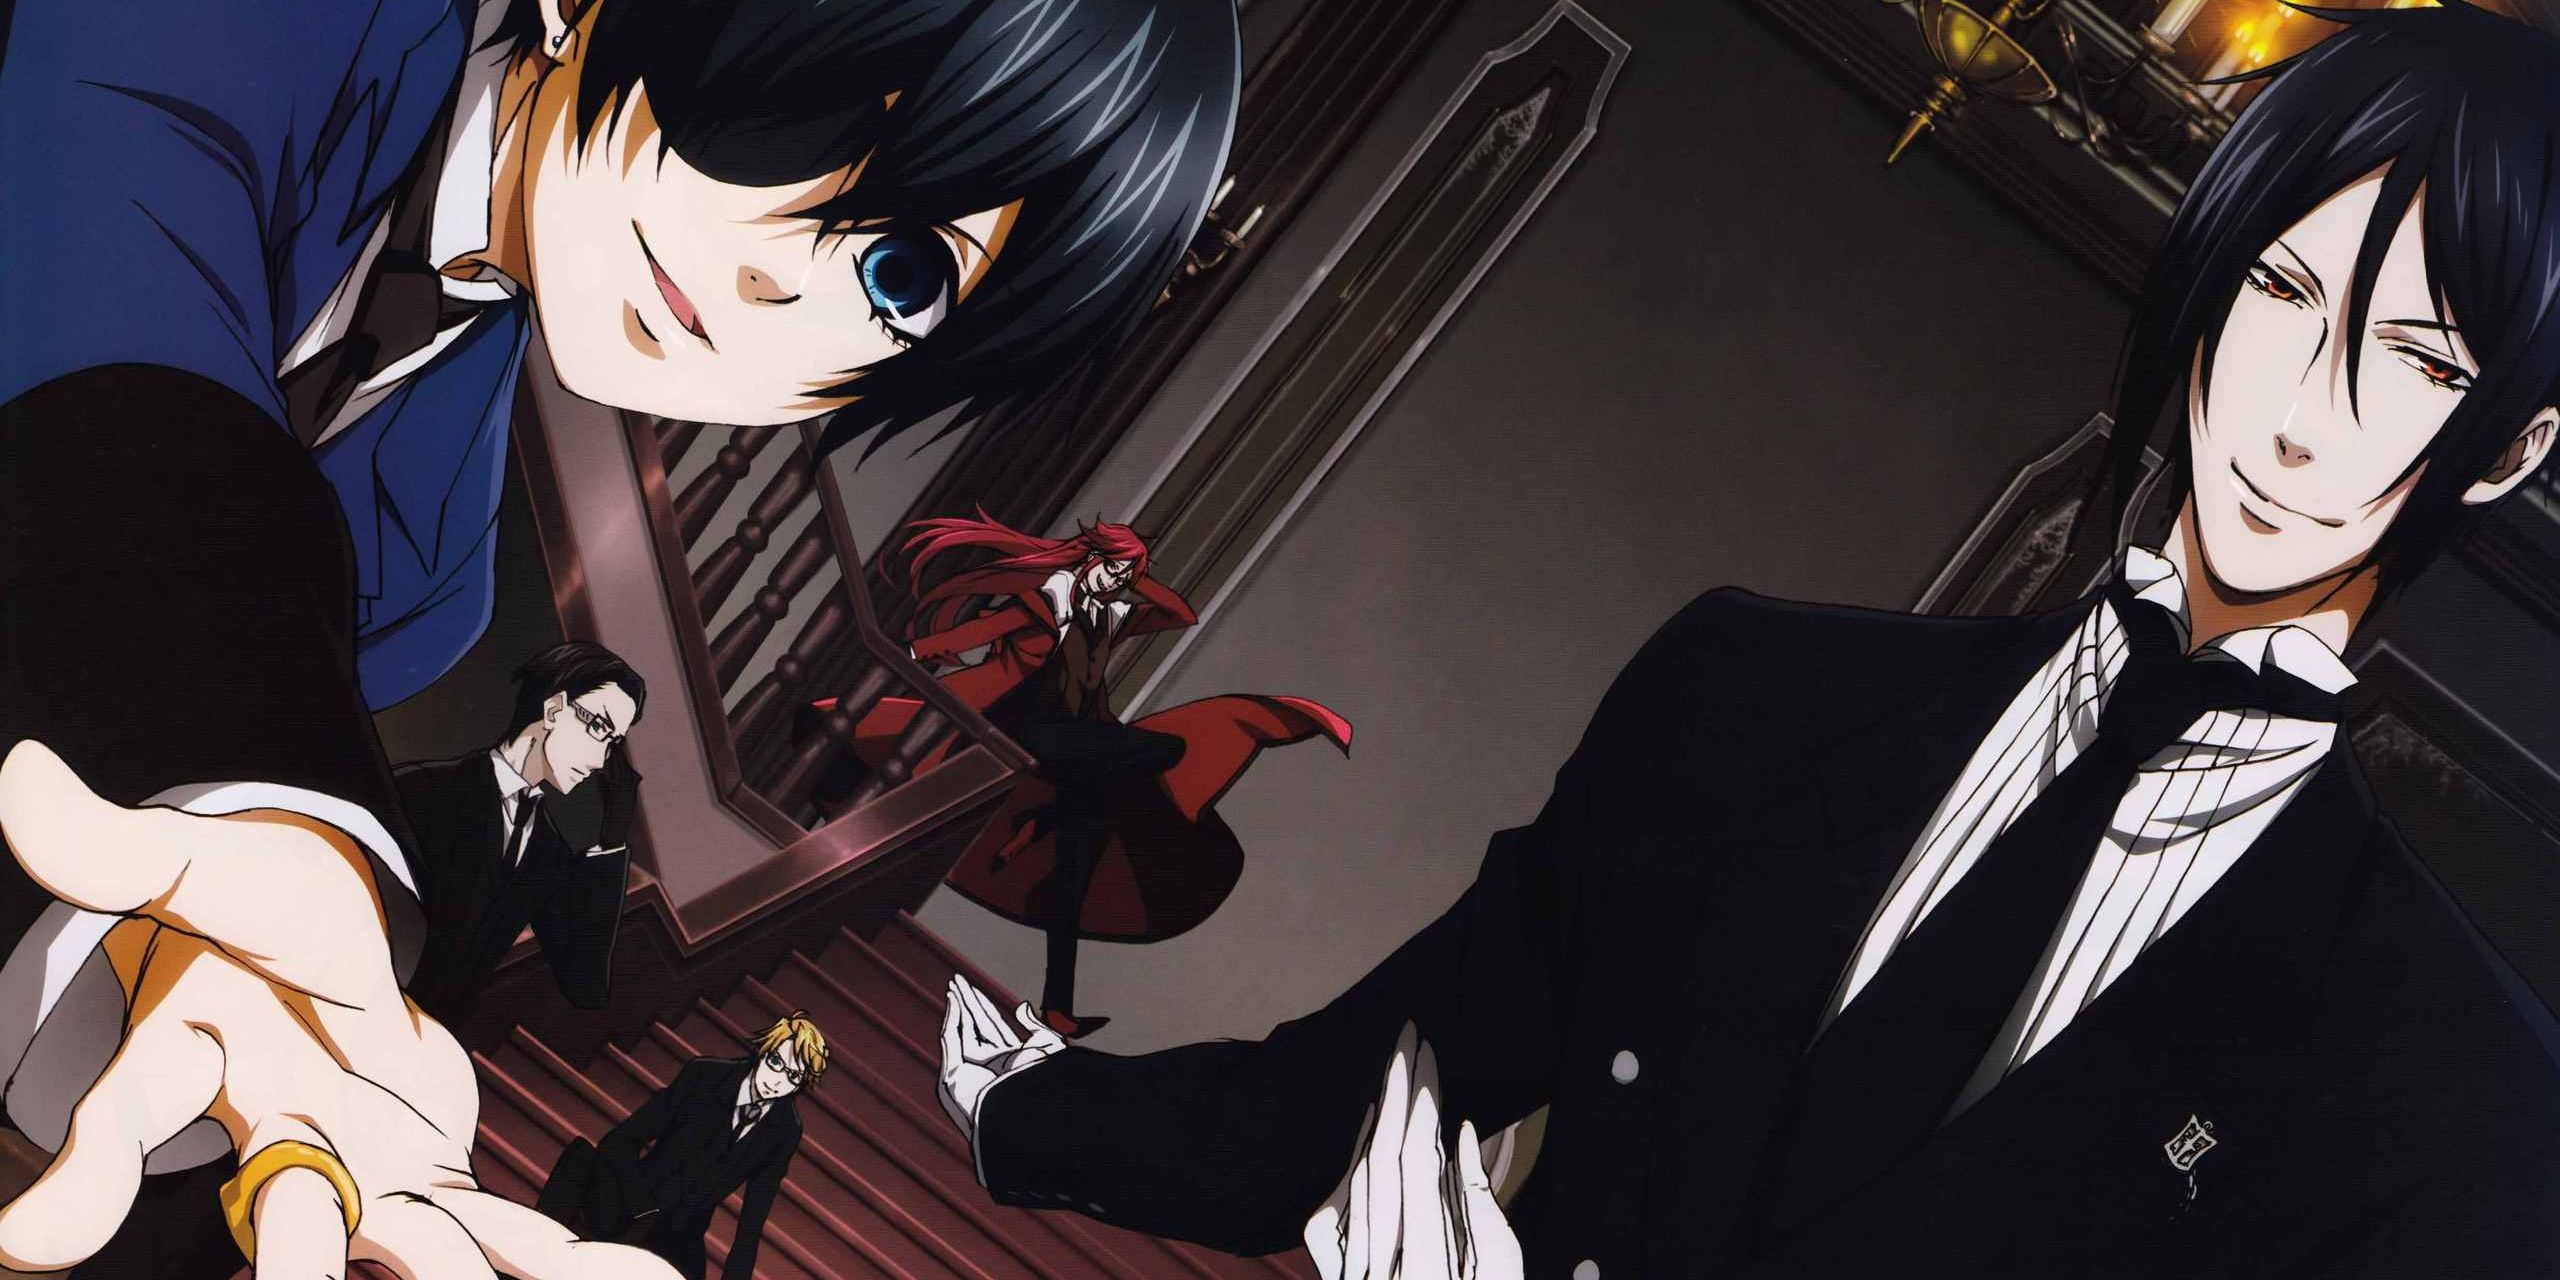 Ciel and Sebastian welcome guests in Black Butler.